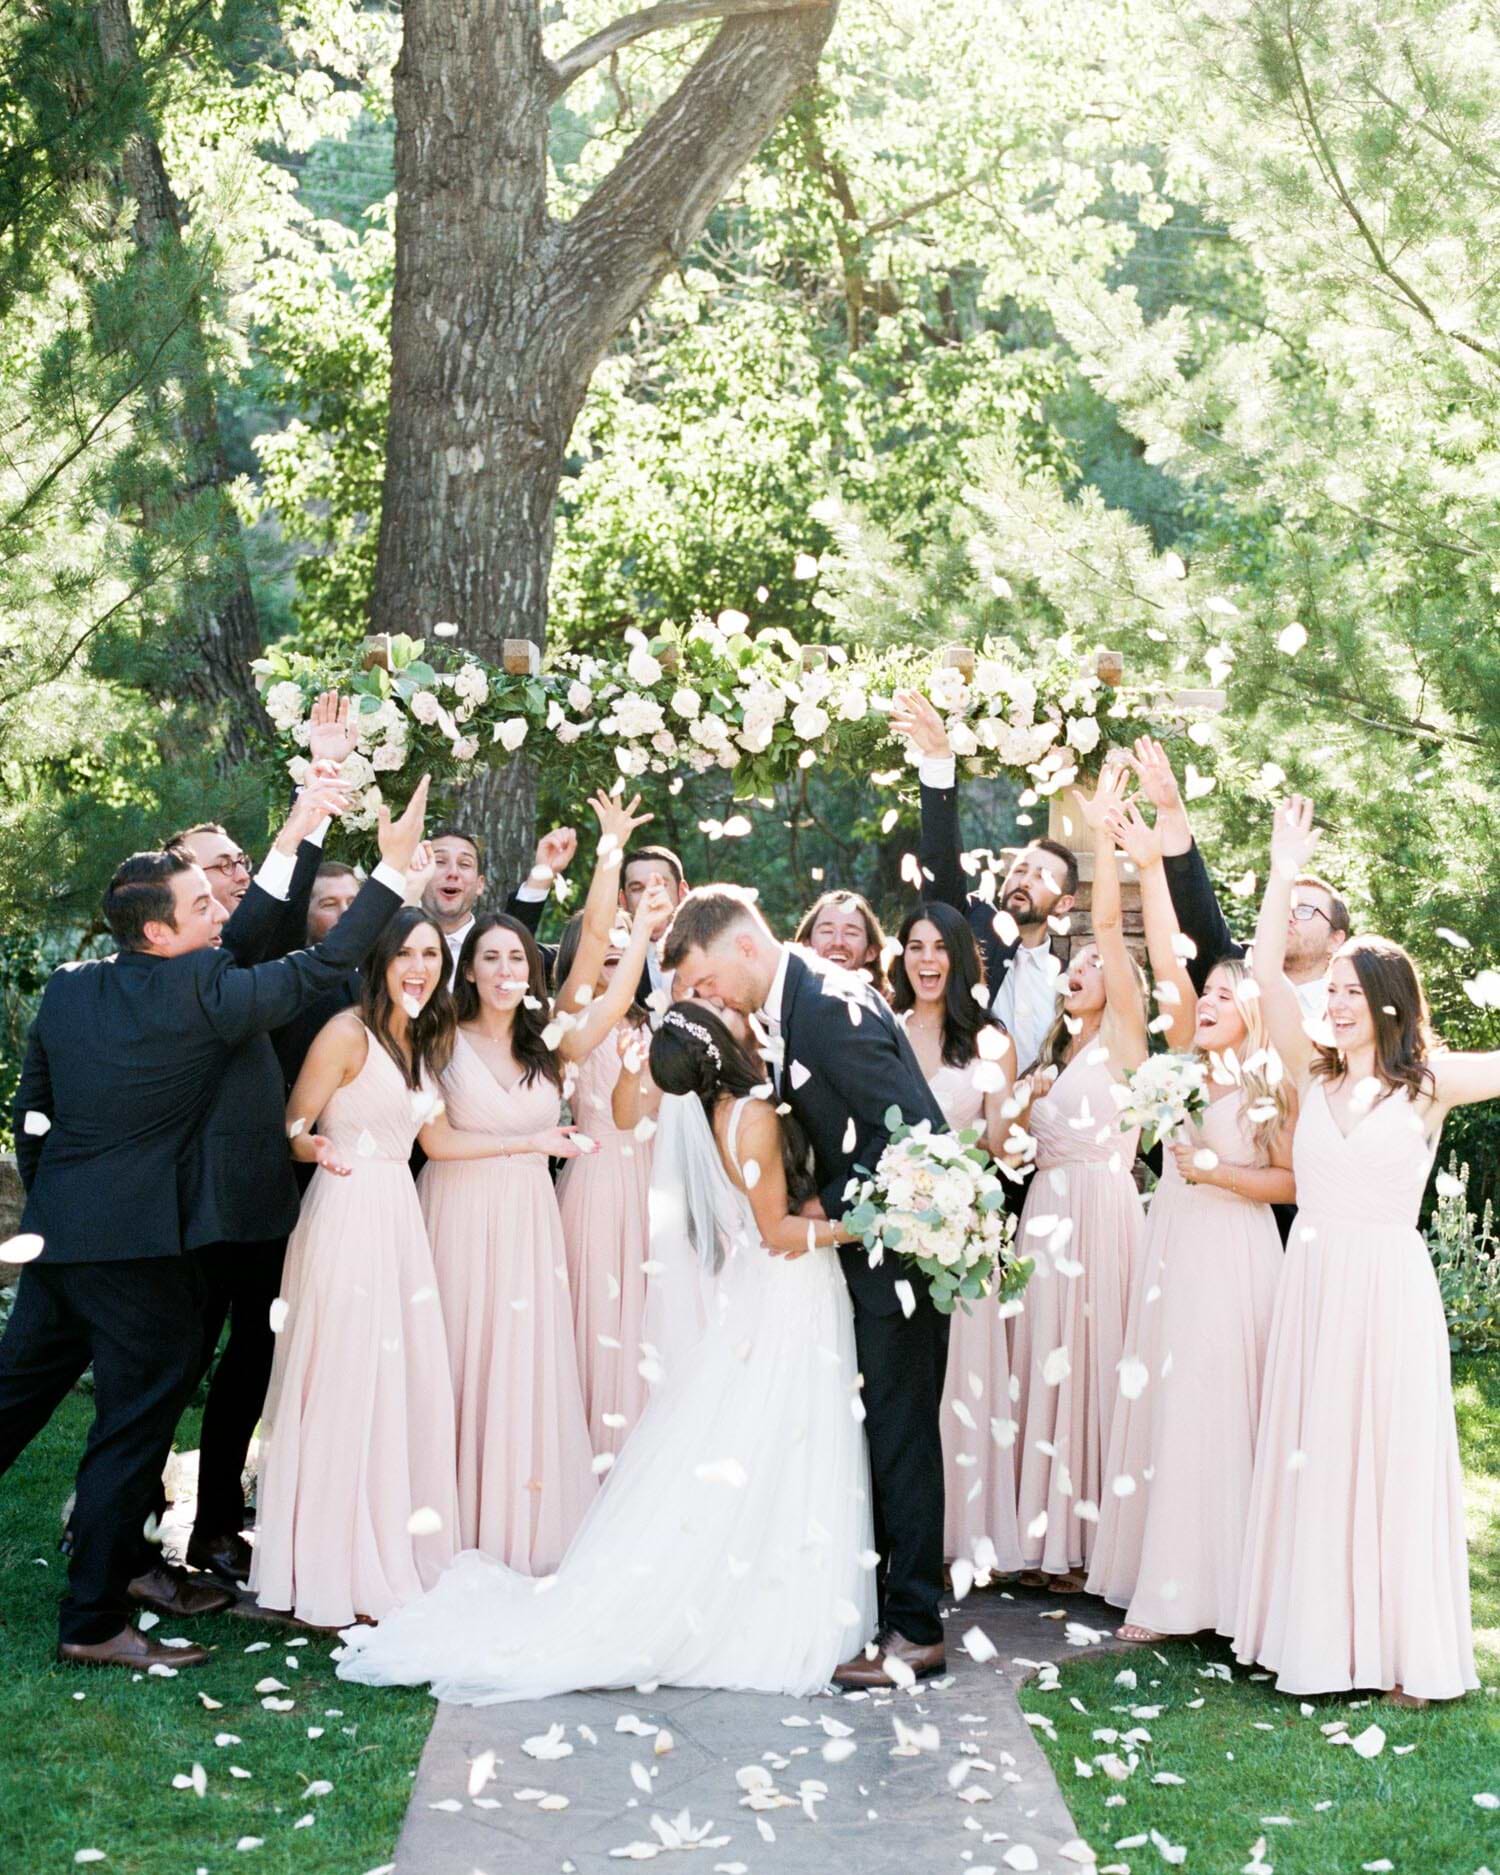 Annie & Jake's Bridal Party Celebrates With A Floral Parade